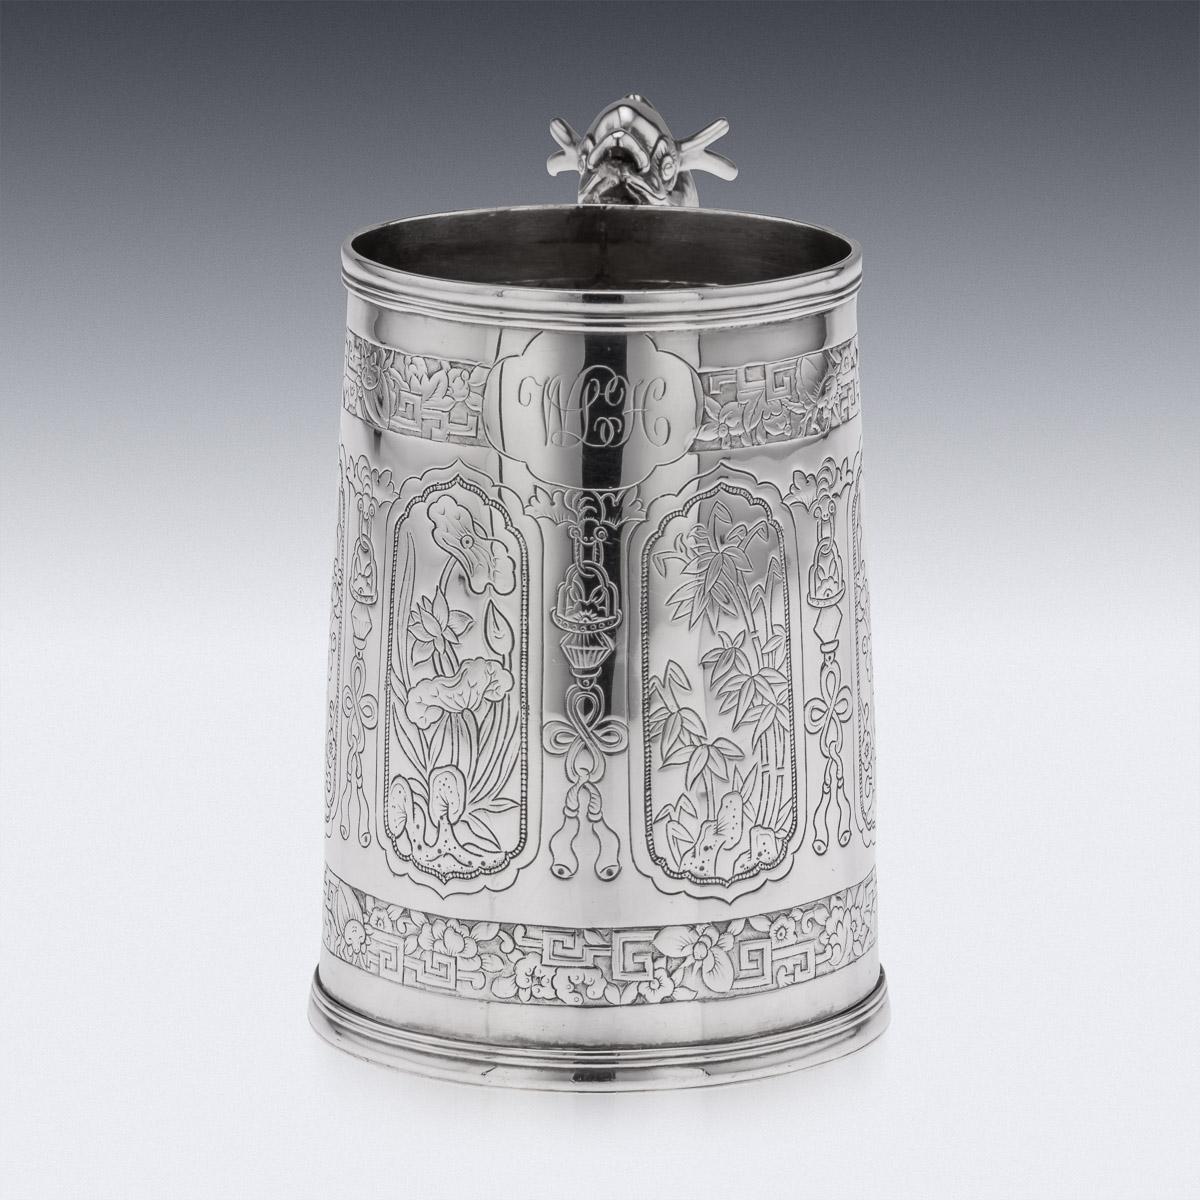 19th Century Chinese silver mug, of traditional tapered shape and size, the body decorated with six lozenge shaped panels, engraved inside with various scenes, such as bamboo, blossoming cherry trees, water lillies, the front centered with a